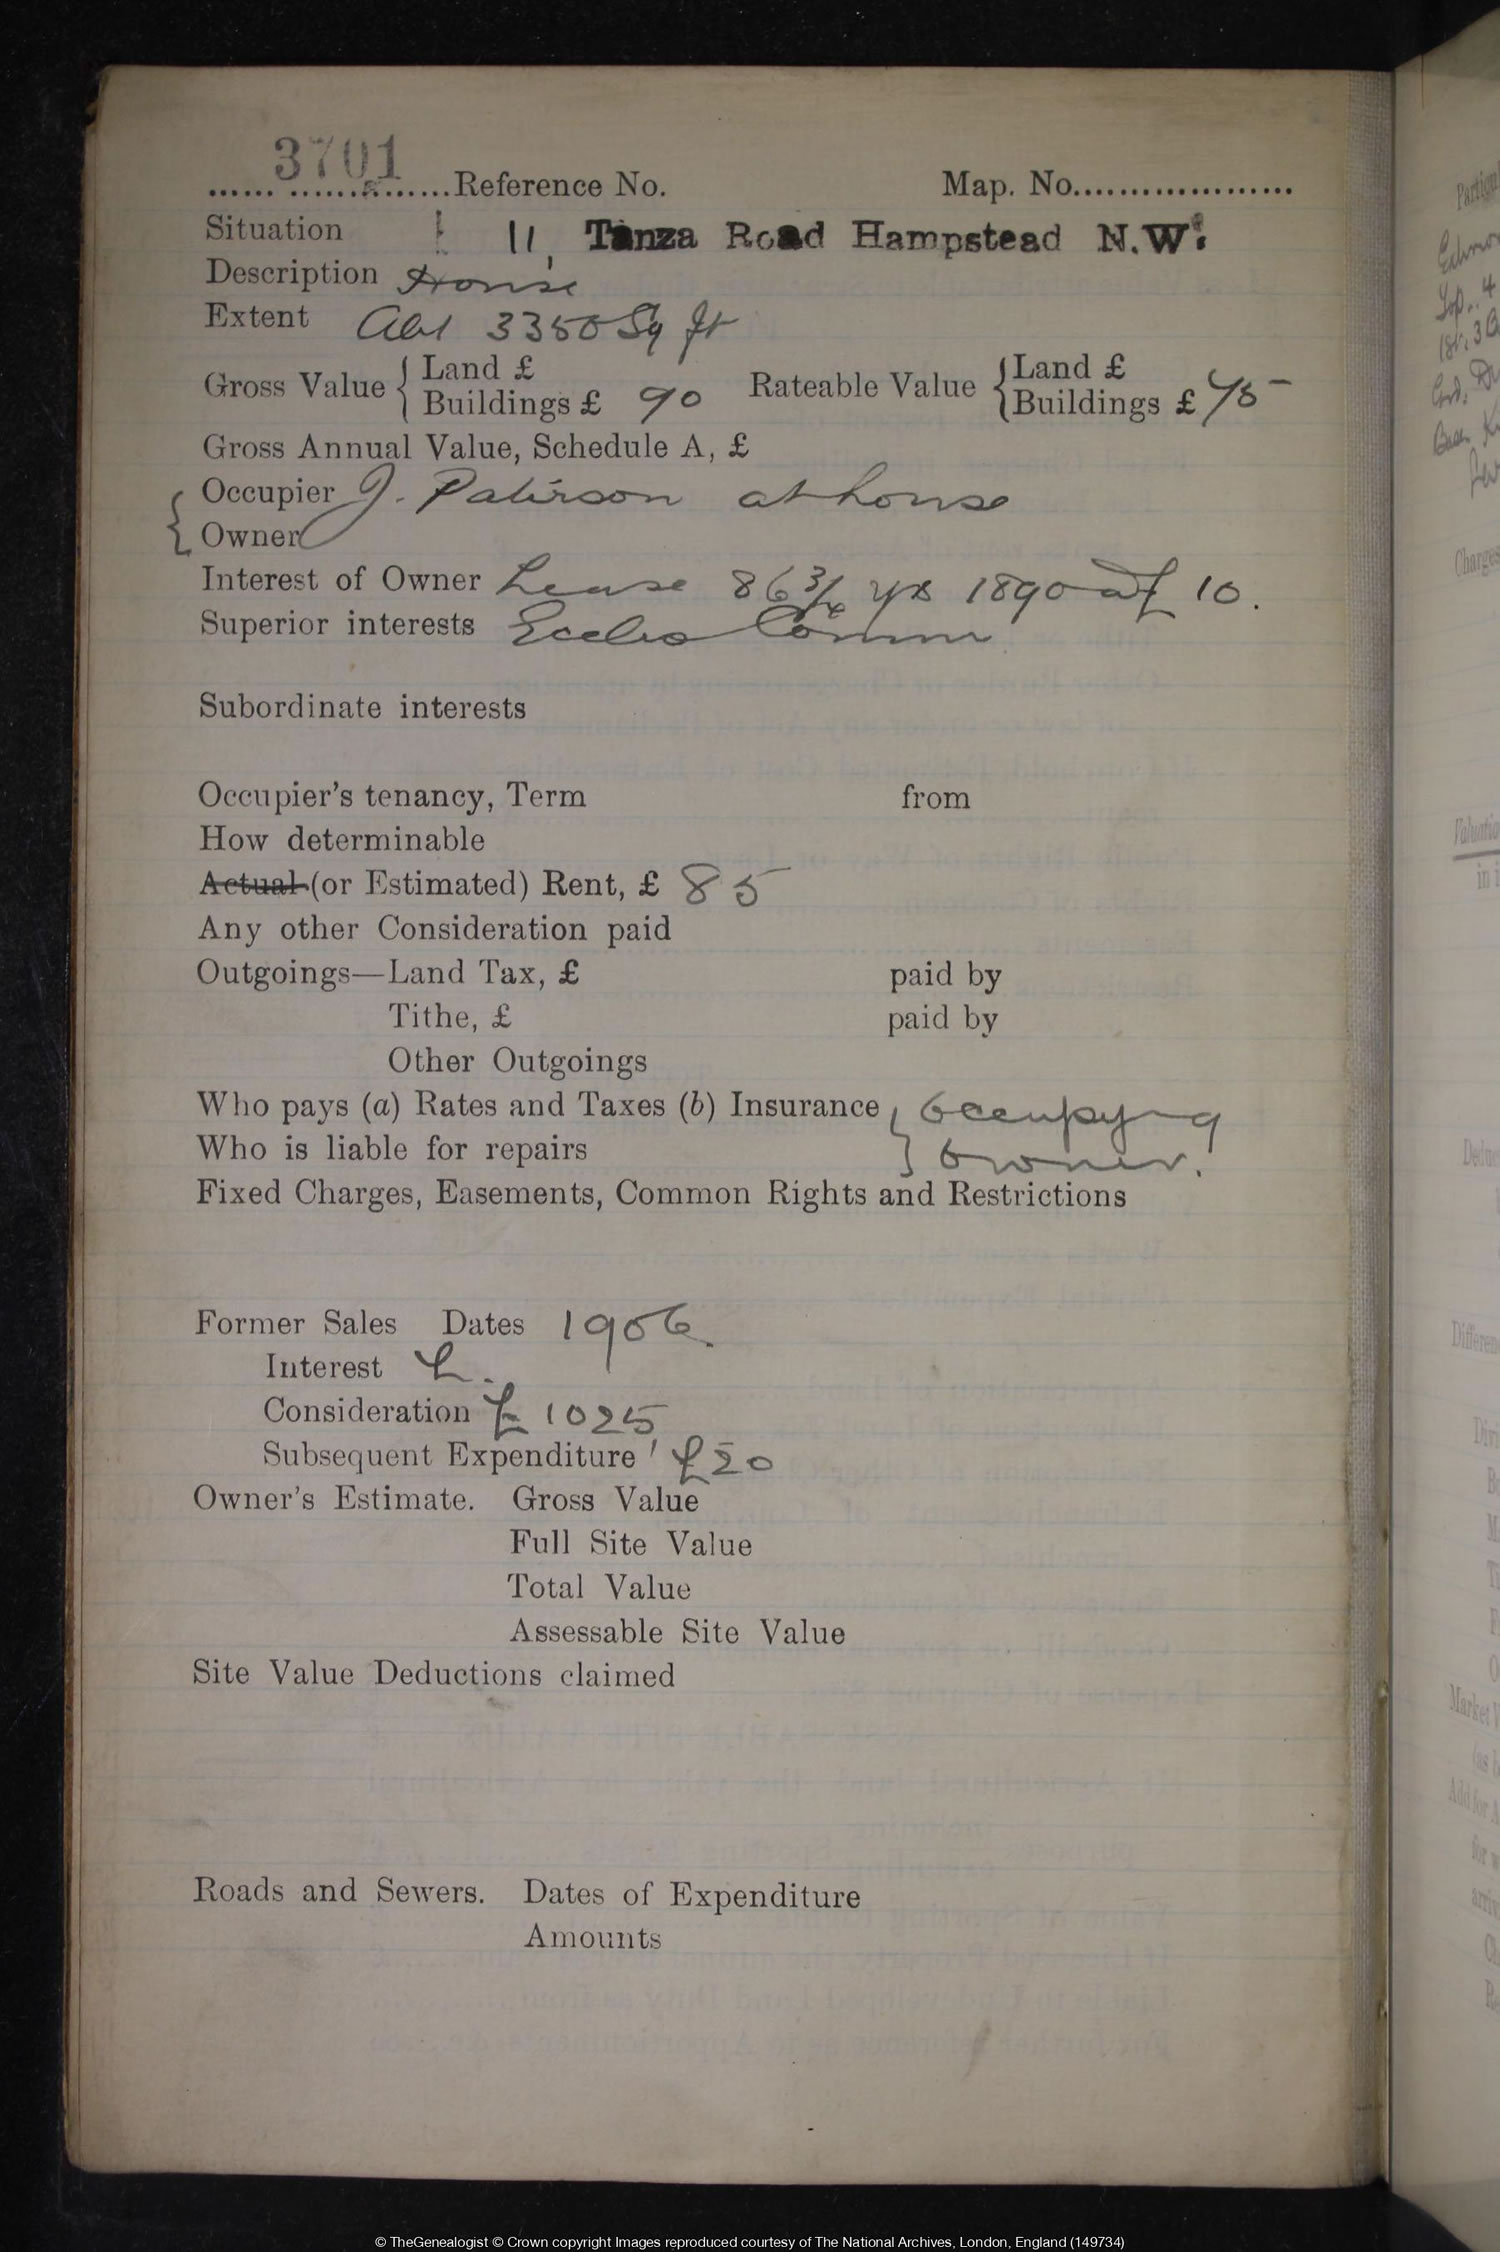 IR58 Field book describes 11 Tanza Road before it was bought by Lady Byron